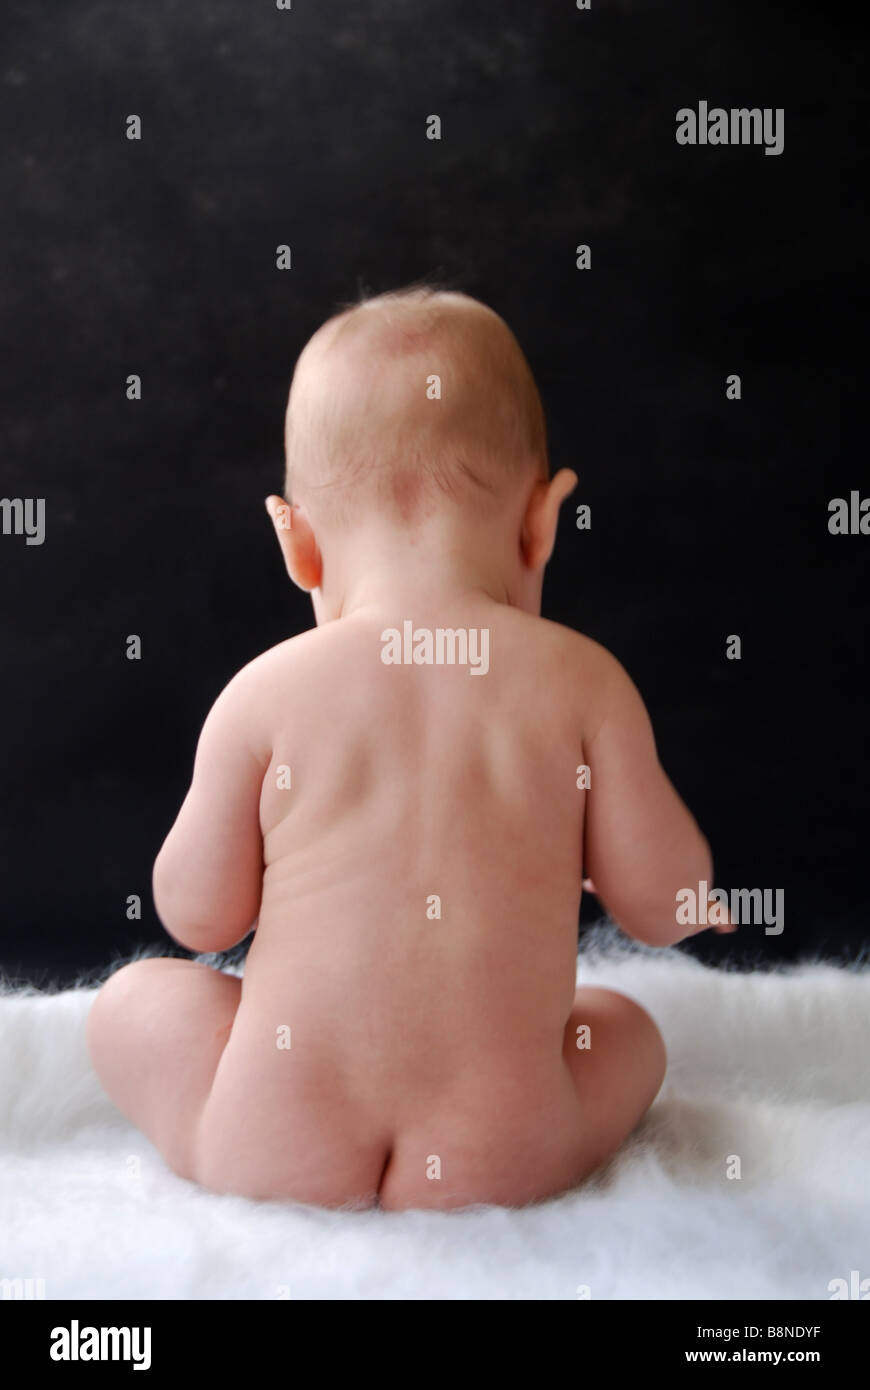 Back of baby sitting naked on a rug Stock Photo